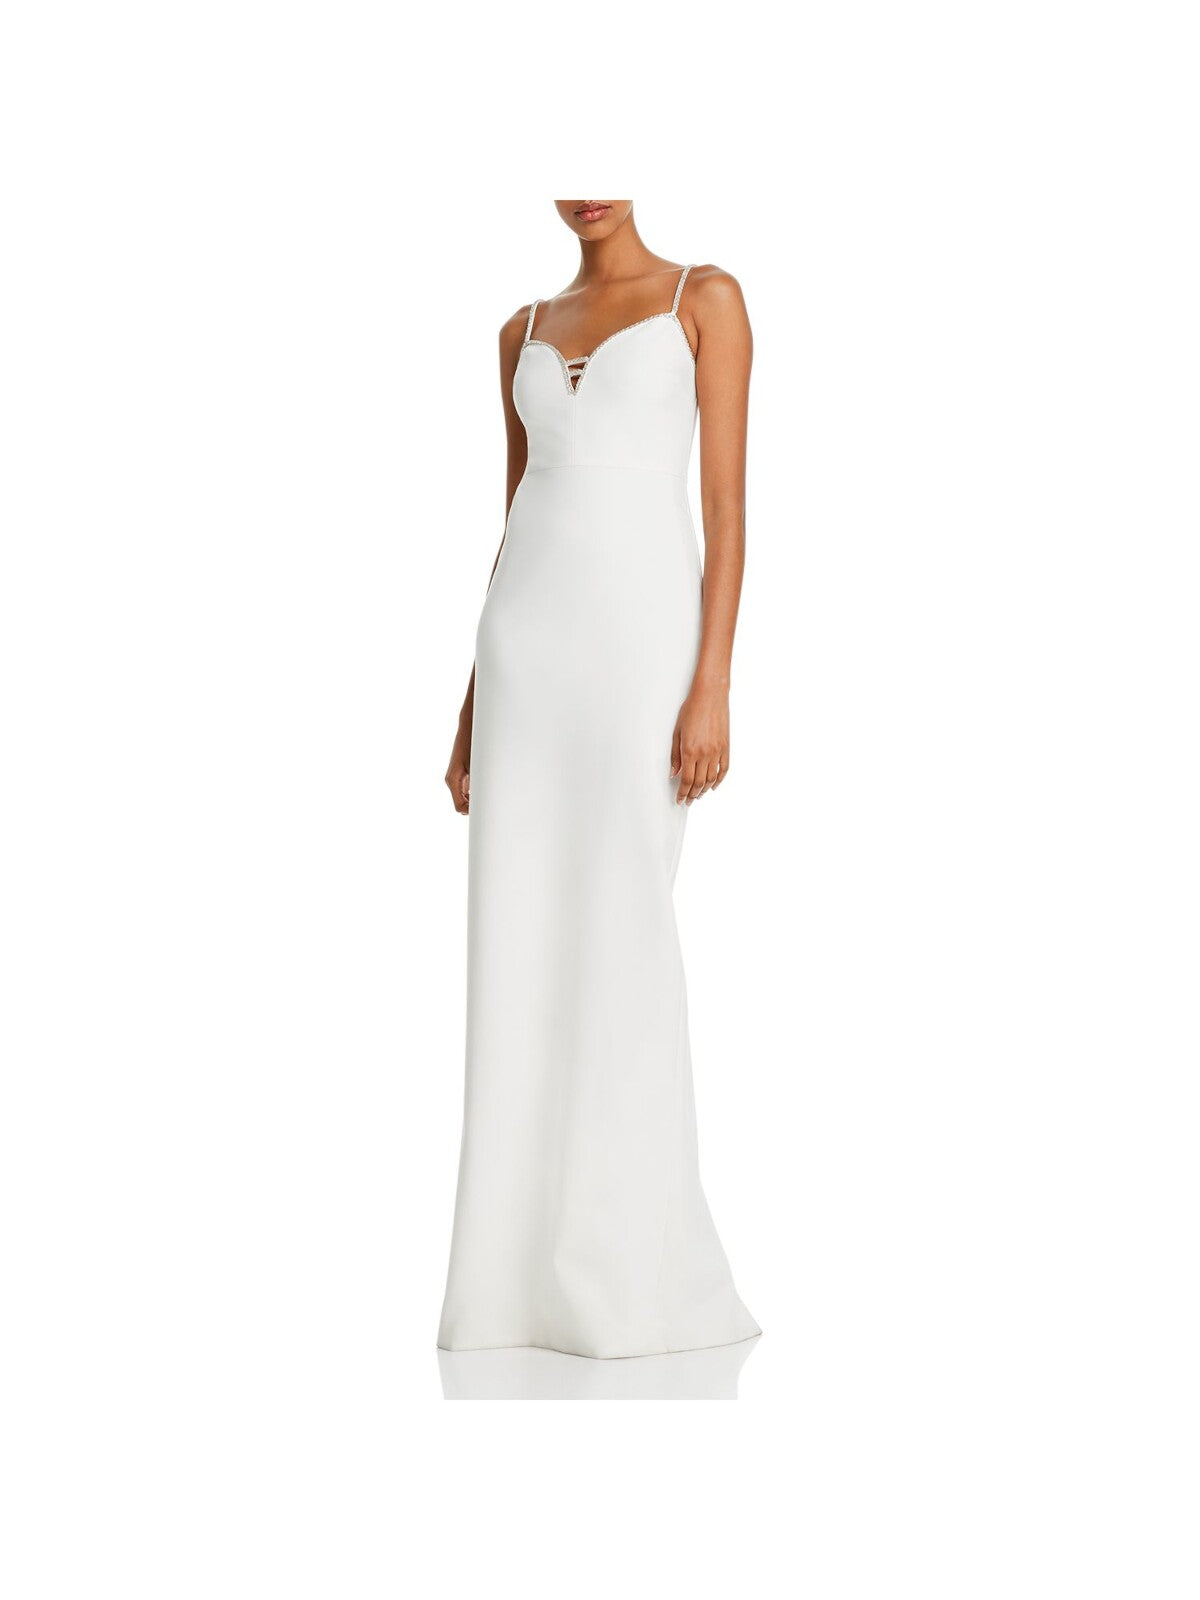 LIKELY Womens White Beaded Zippered Cut Out Slitted Spaghetti Strap Sweetheart Neckline Full-Length Formal Gown Dress 2